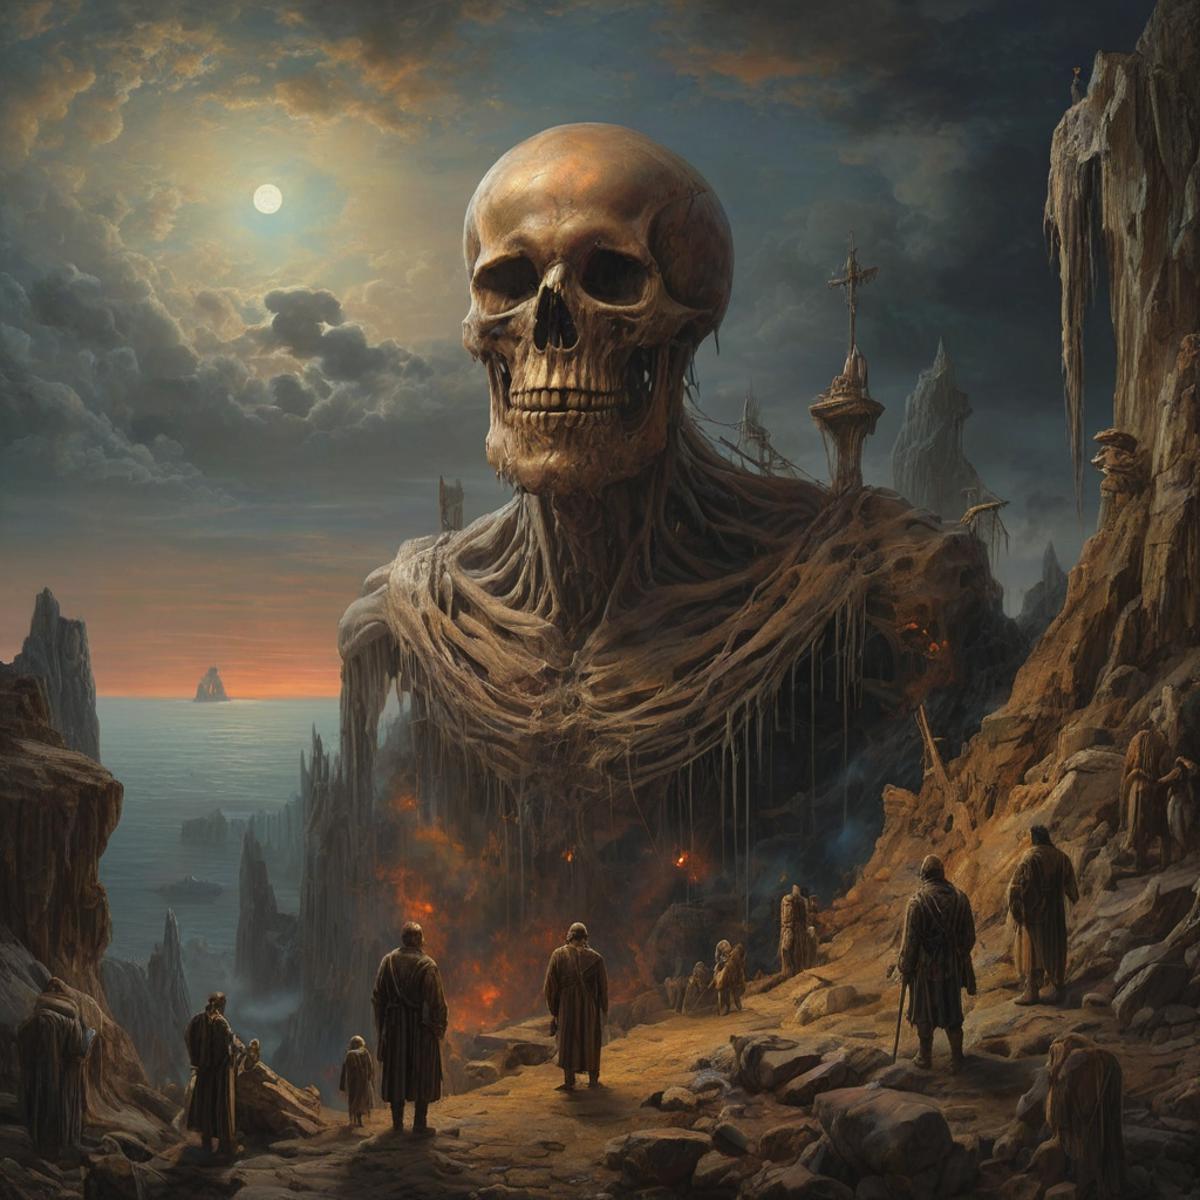 A Painting of Skeletons and a Skull on a Mountain with the Moon in the Background.